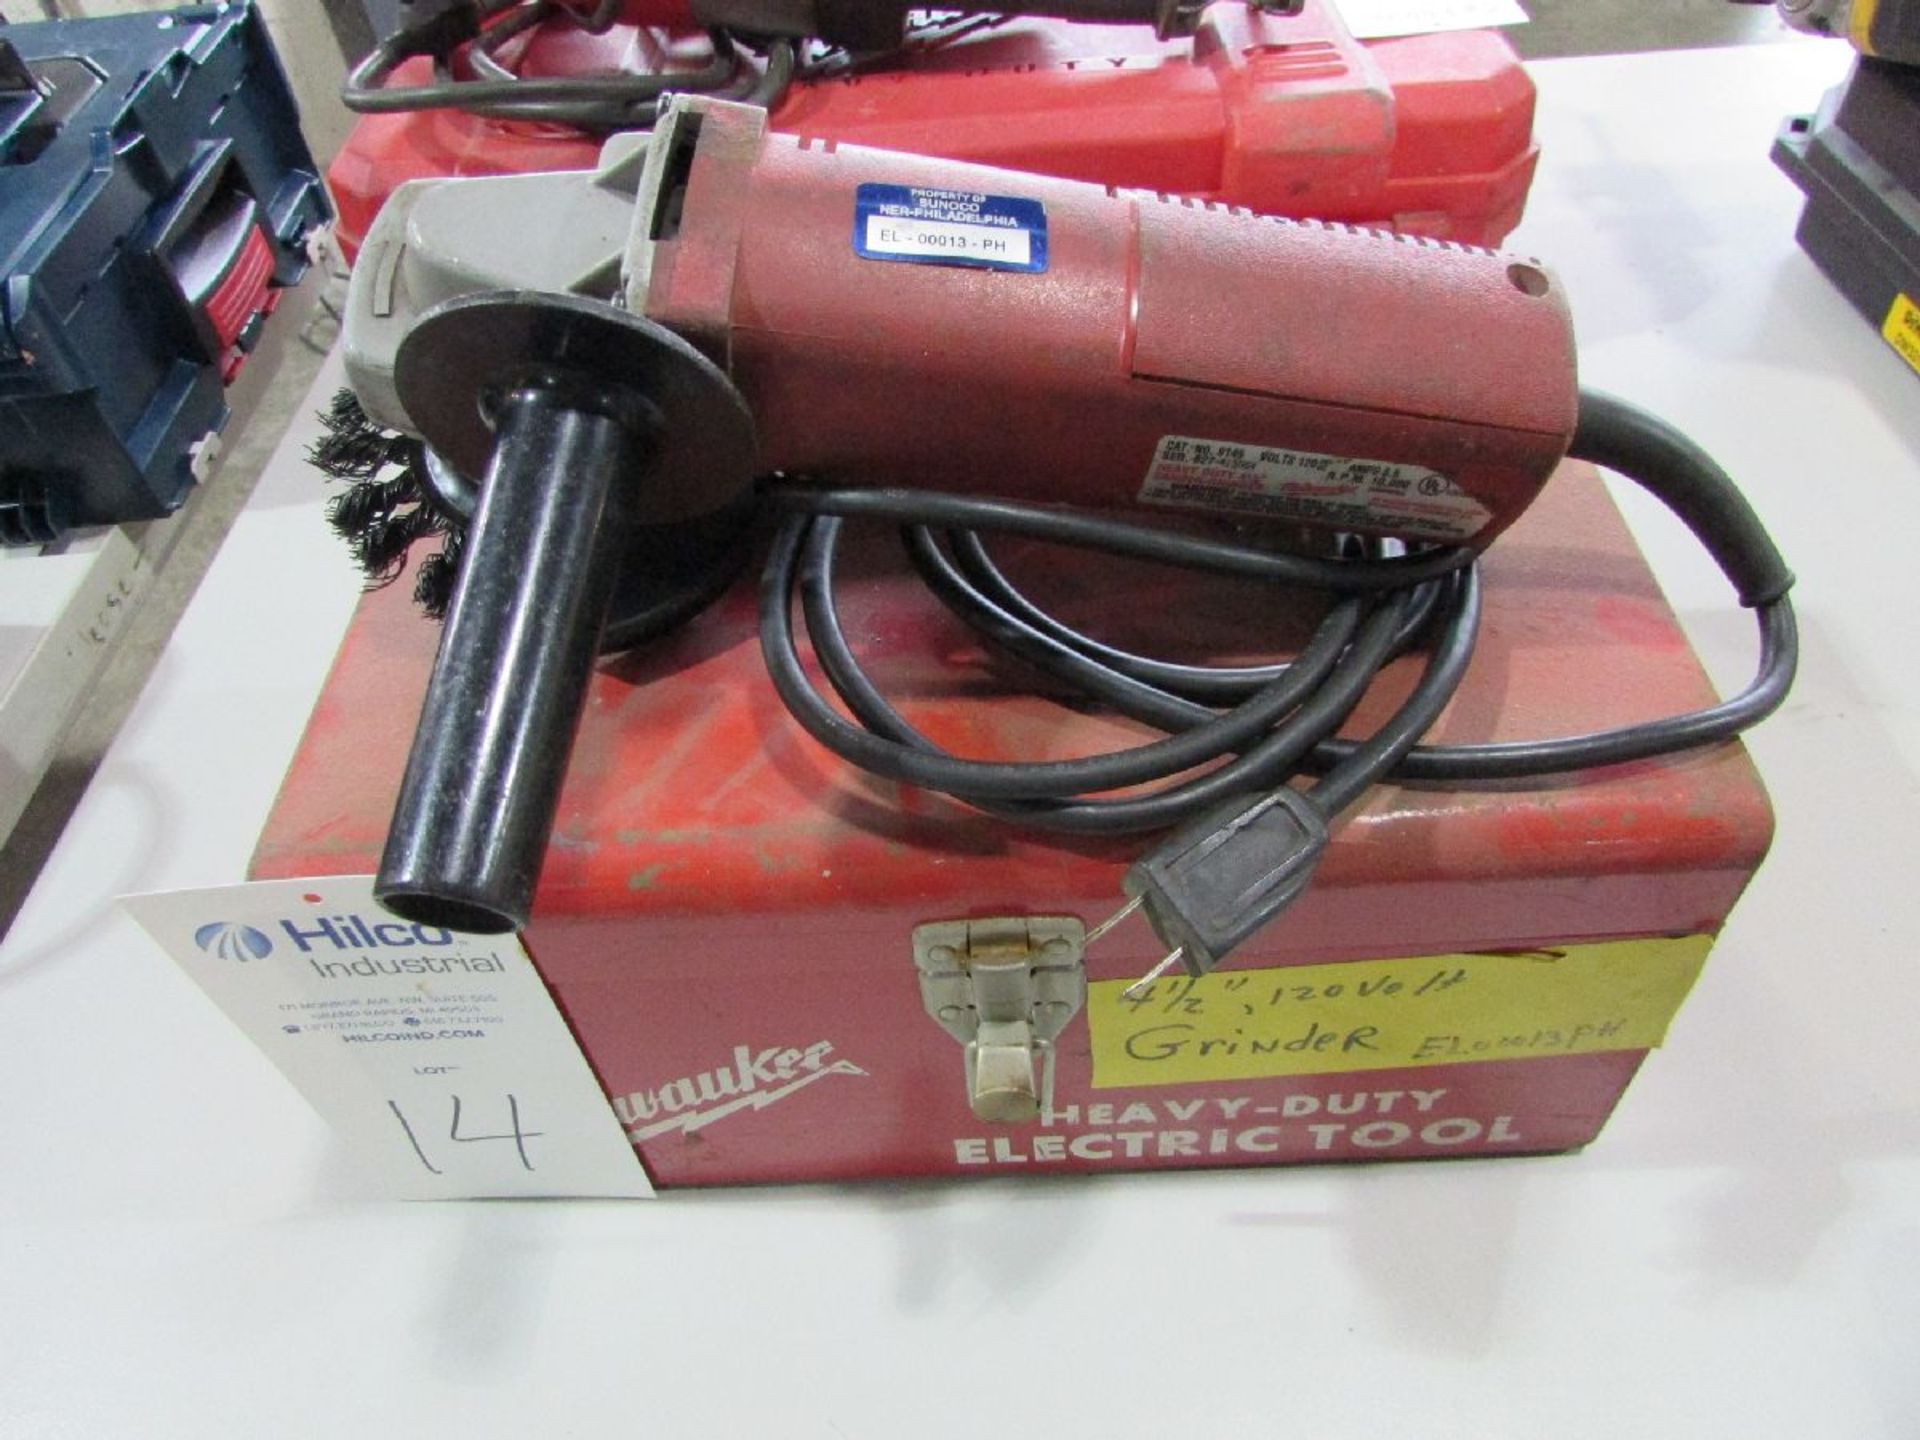 Milwaukee Cat # 6145 4-1/2" Electric Angle Grinder